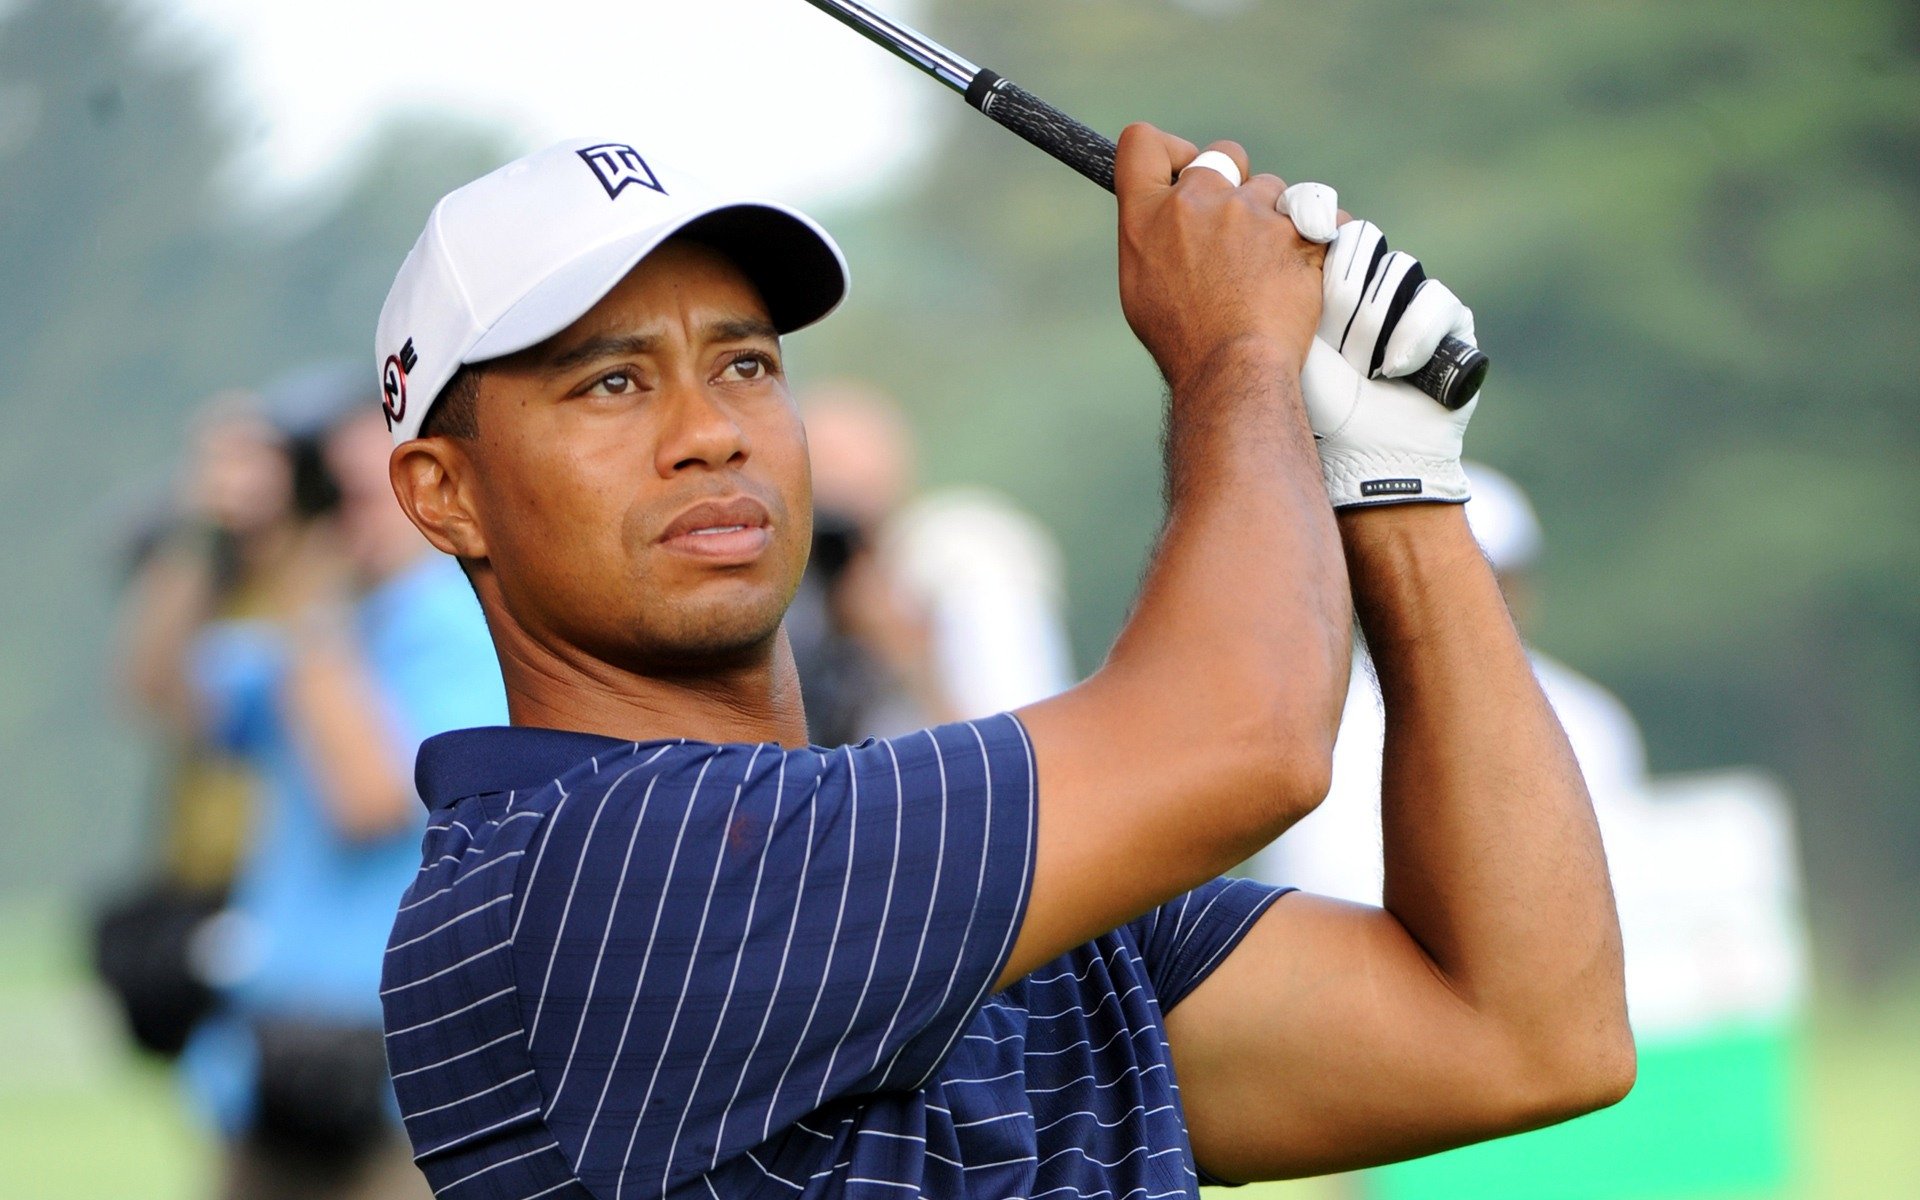 And happy birthday to Eldrick Tont Woods! Tiger Woods is 40 today! 